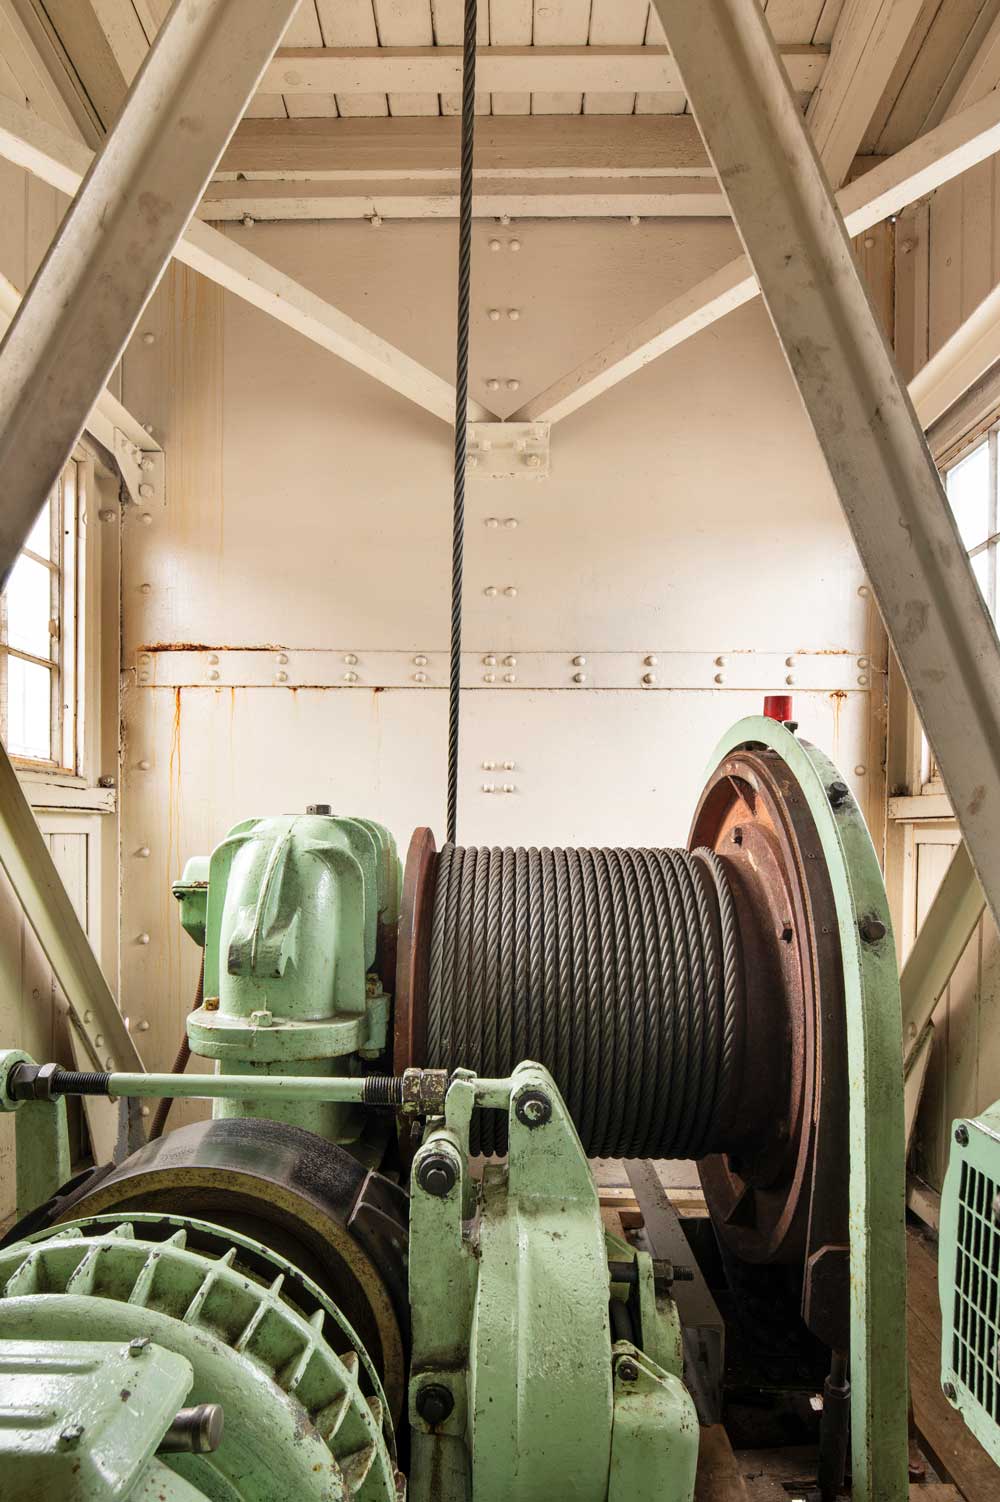 A photograph of the inside of a crane's motor room showing a large cable winch.